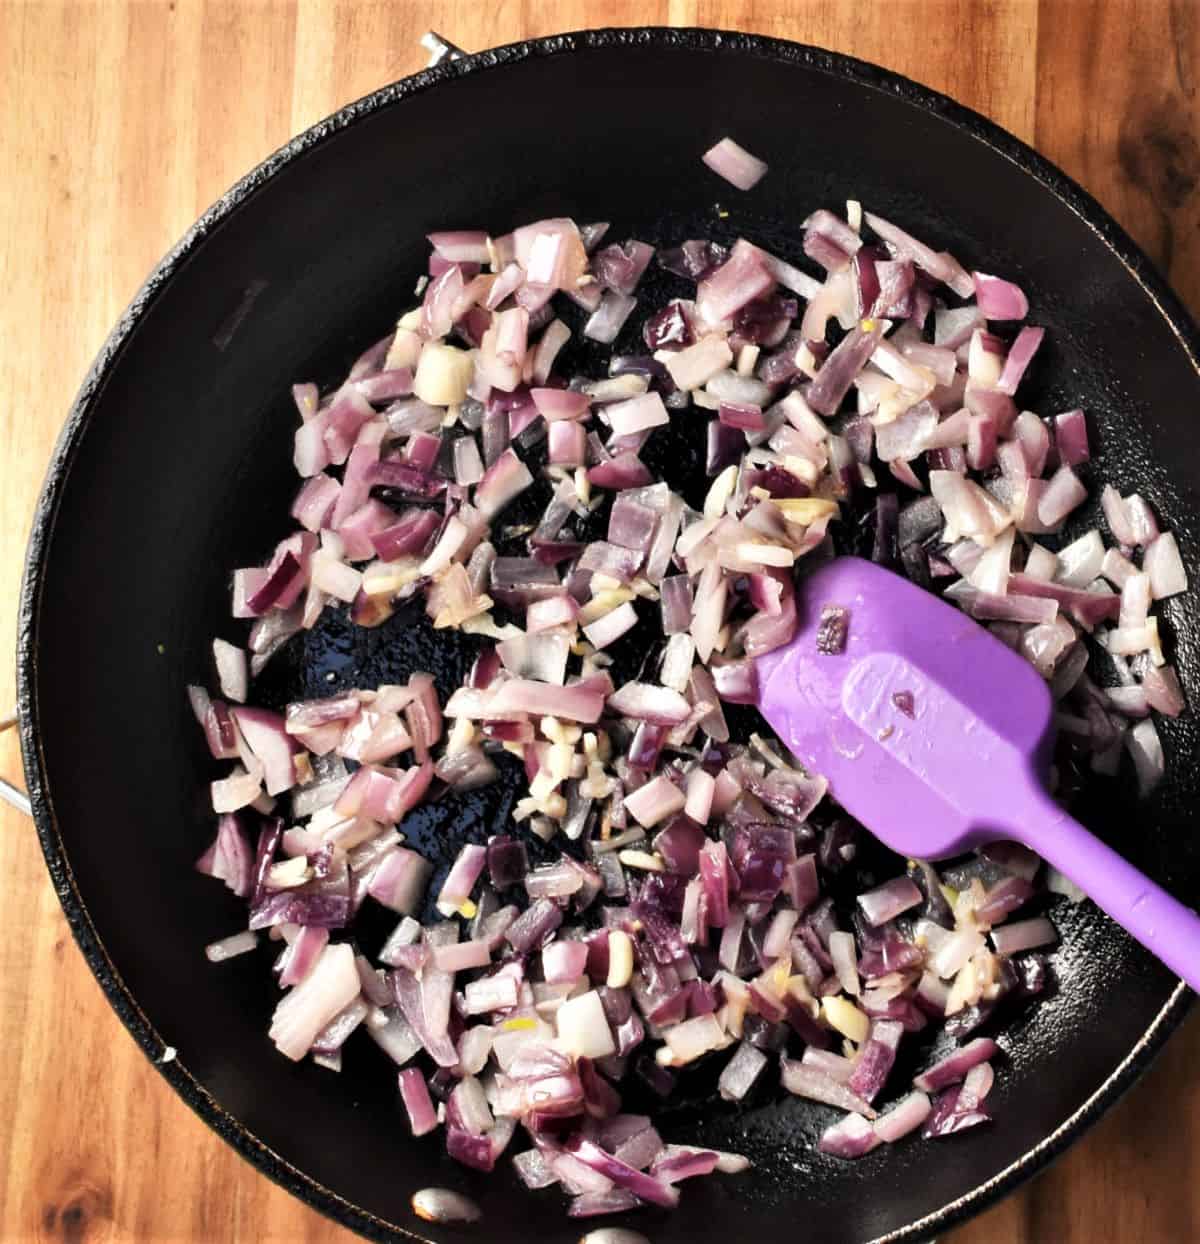 Frying red onion in pan with purple spatula.